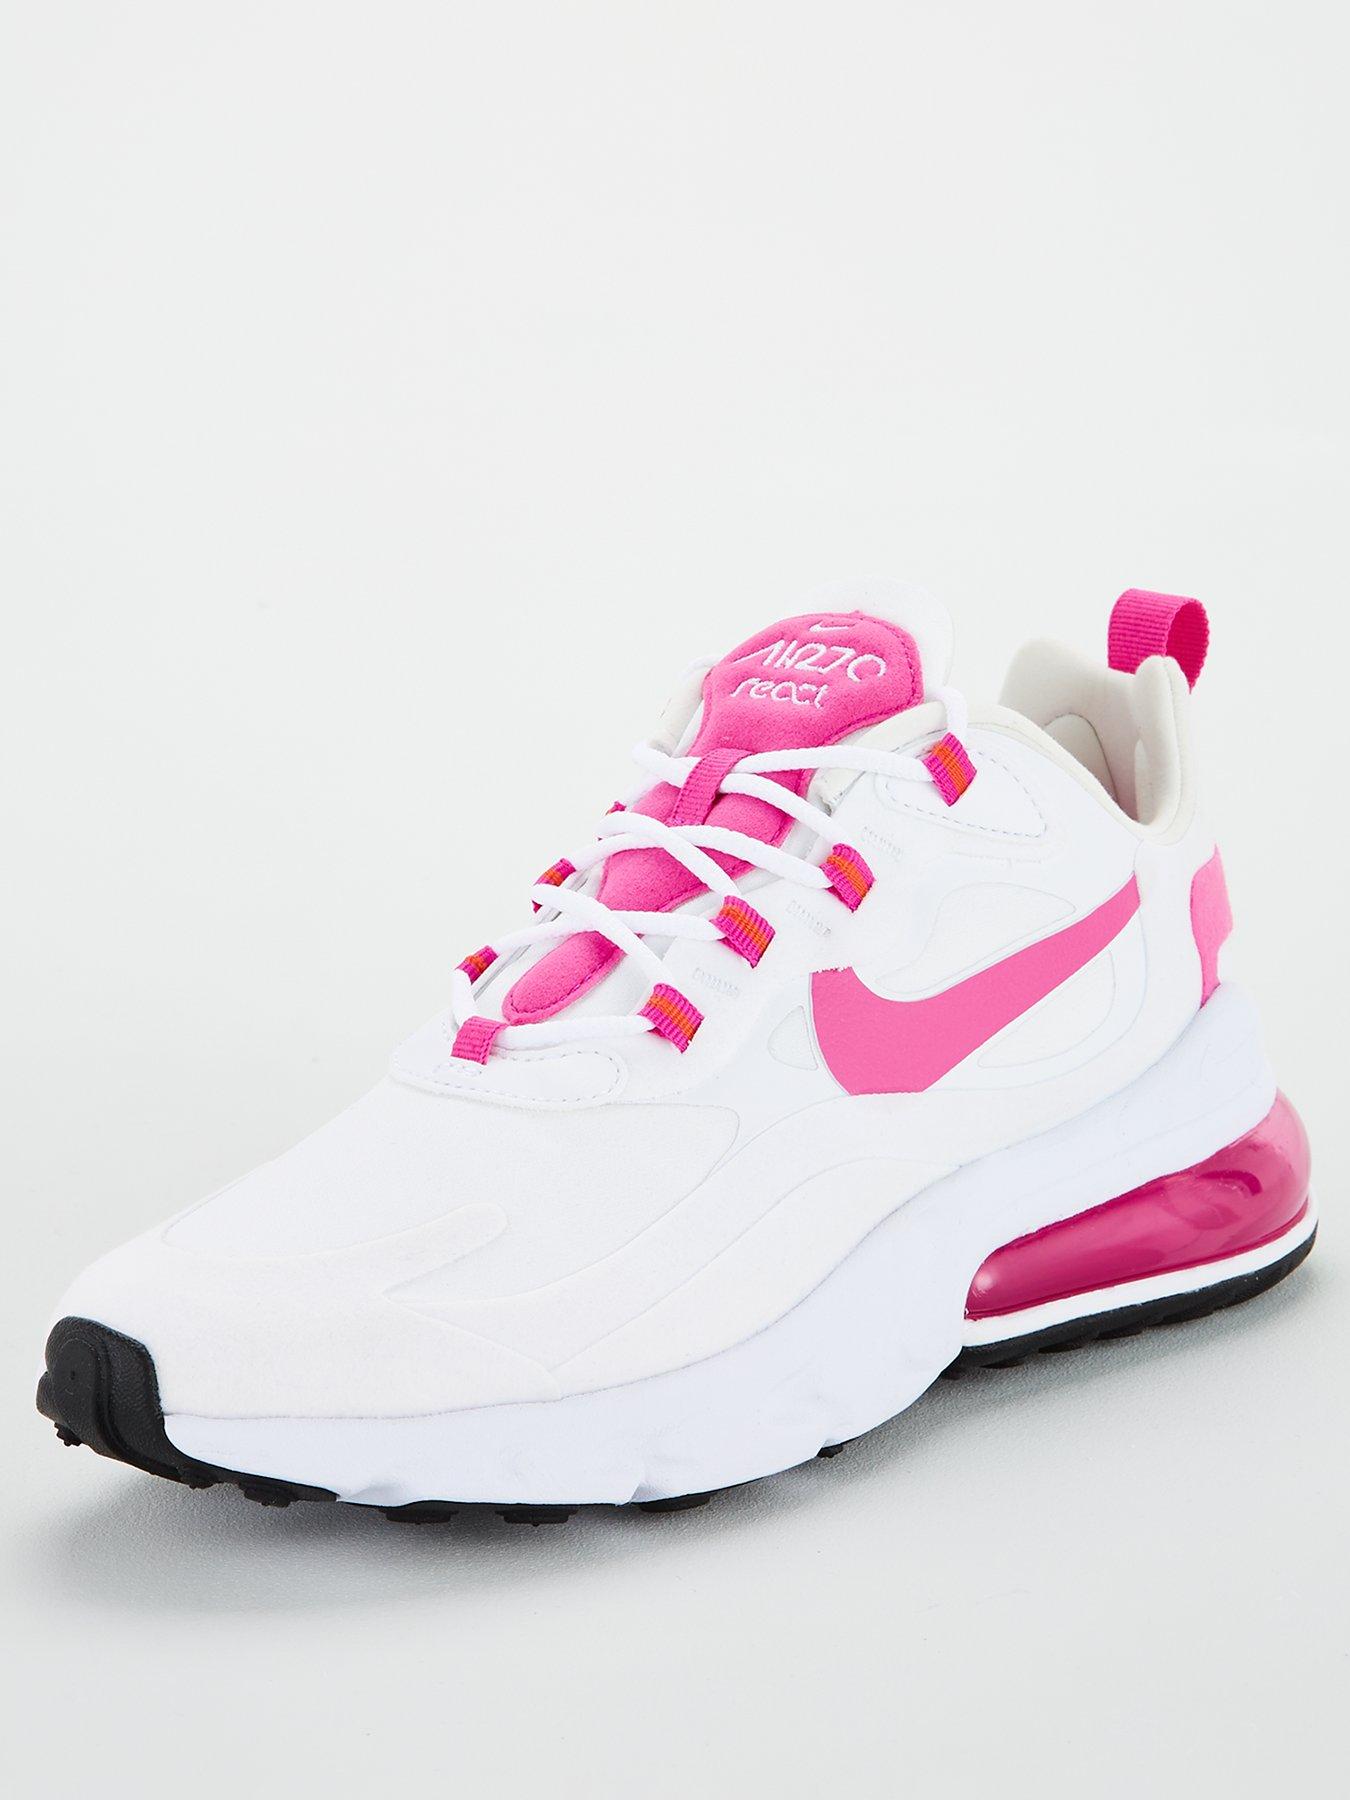 nike white & pink air max 270 knit trainers junior